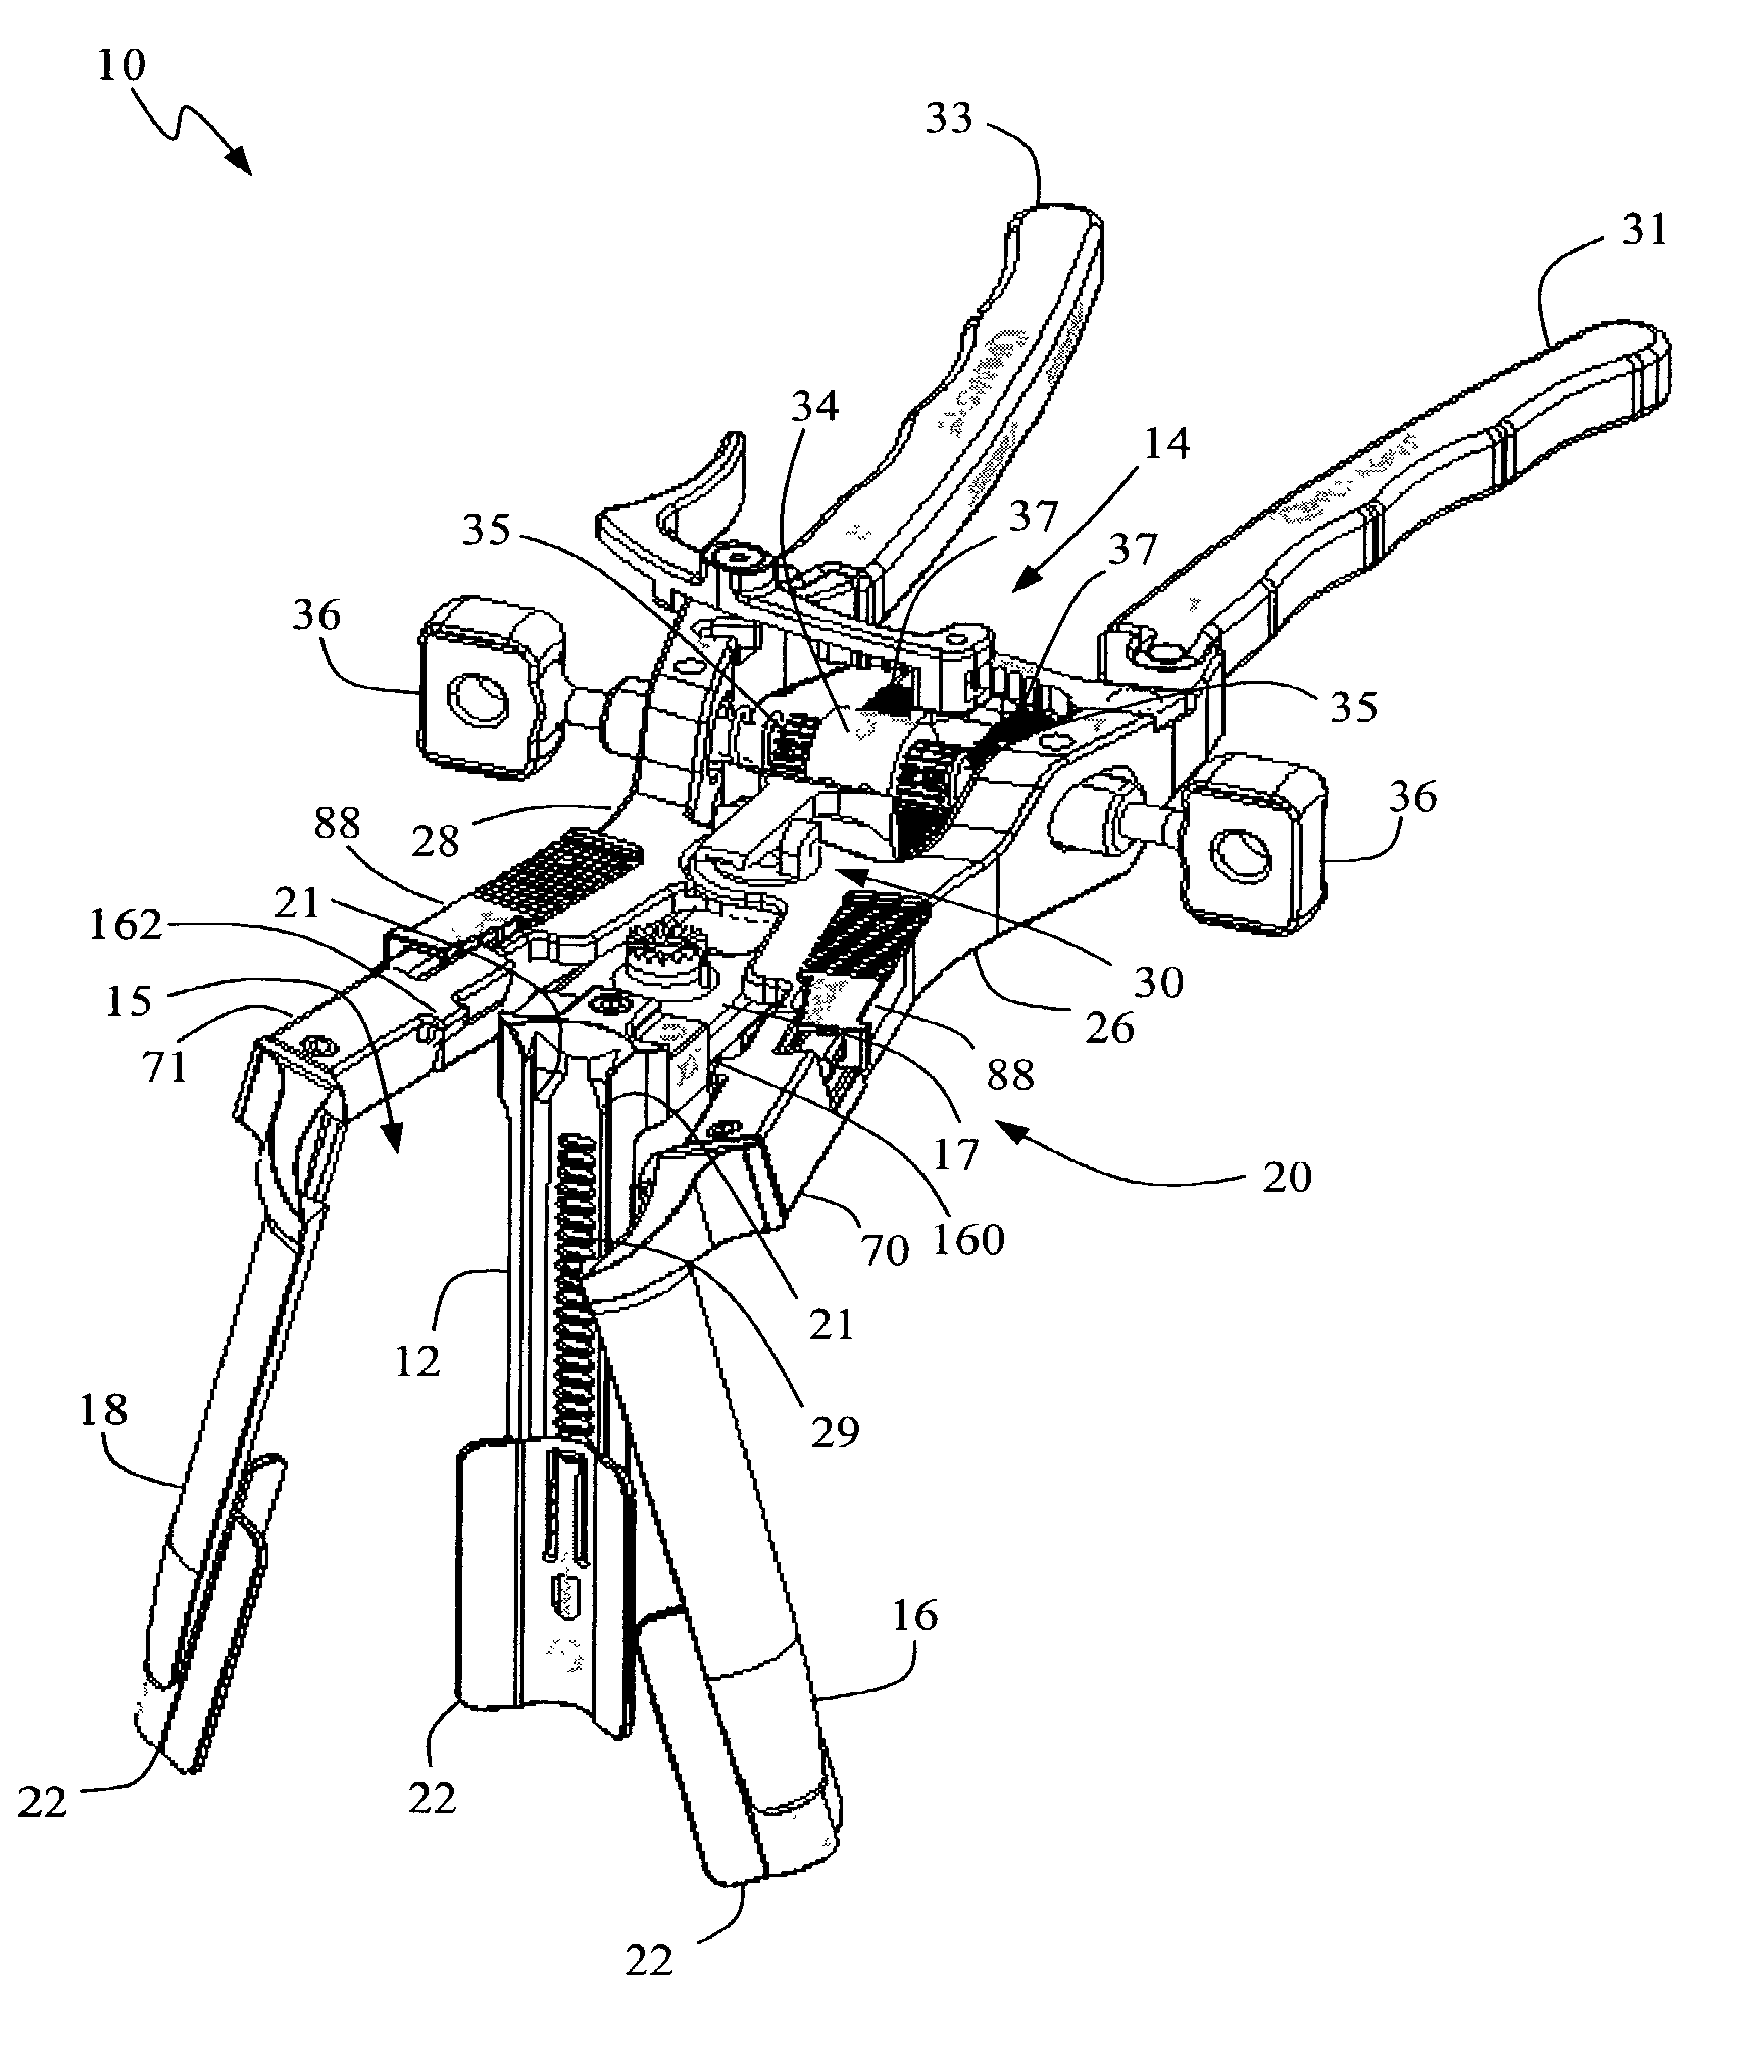 Surgical access system and related methods